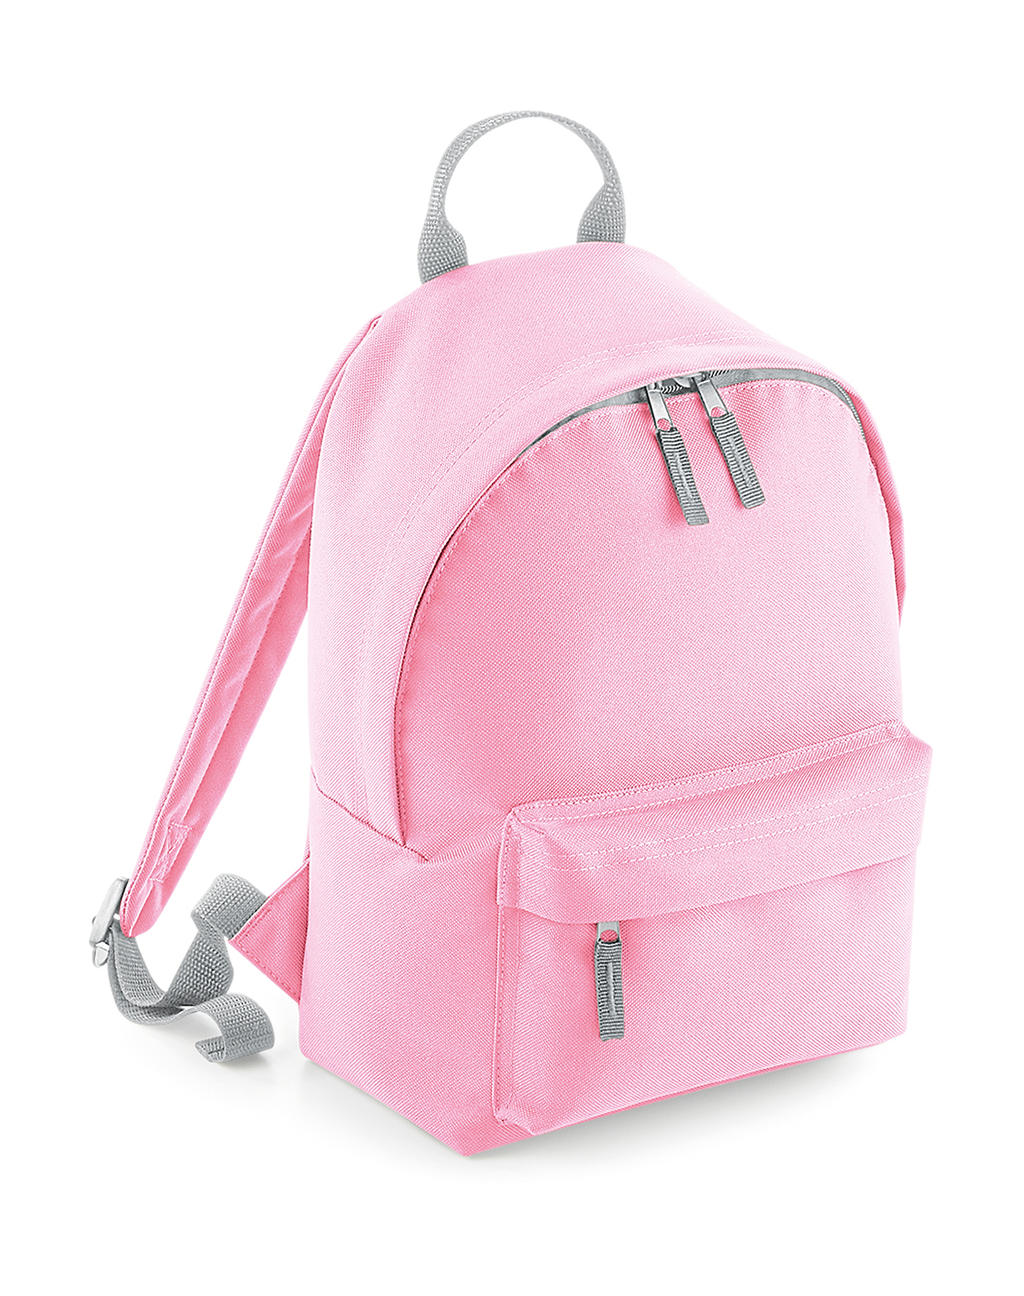  Mini Fashion Backpack in Farbe Classic Pink/Light Grey